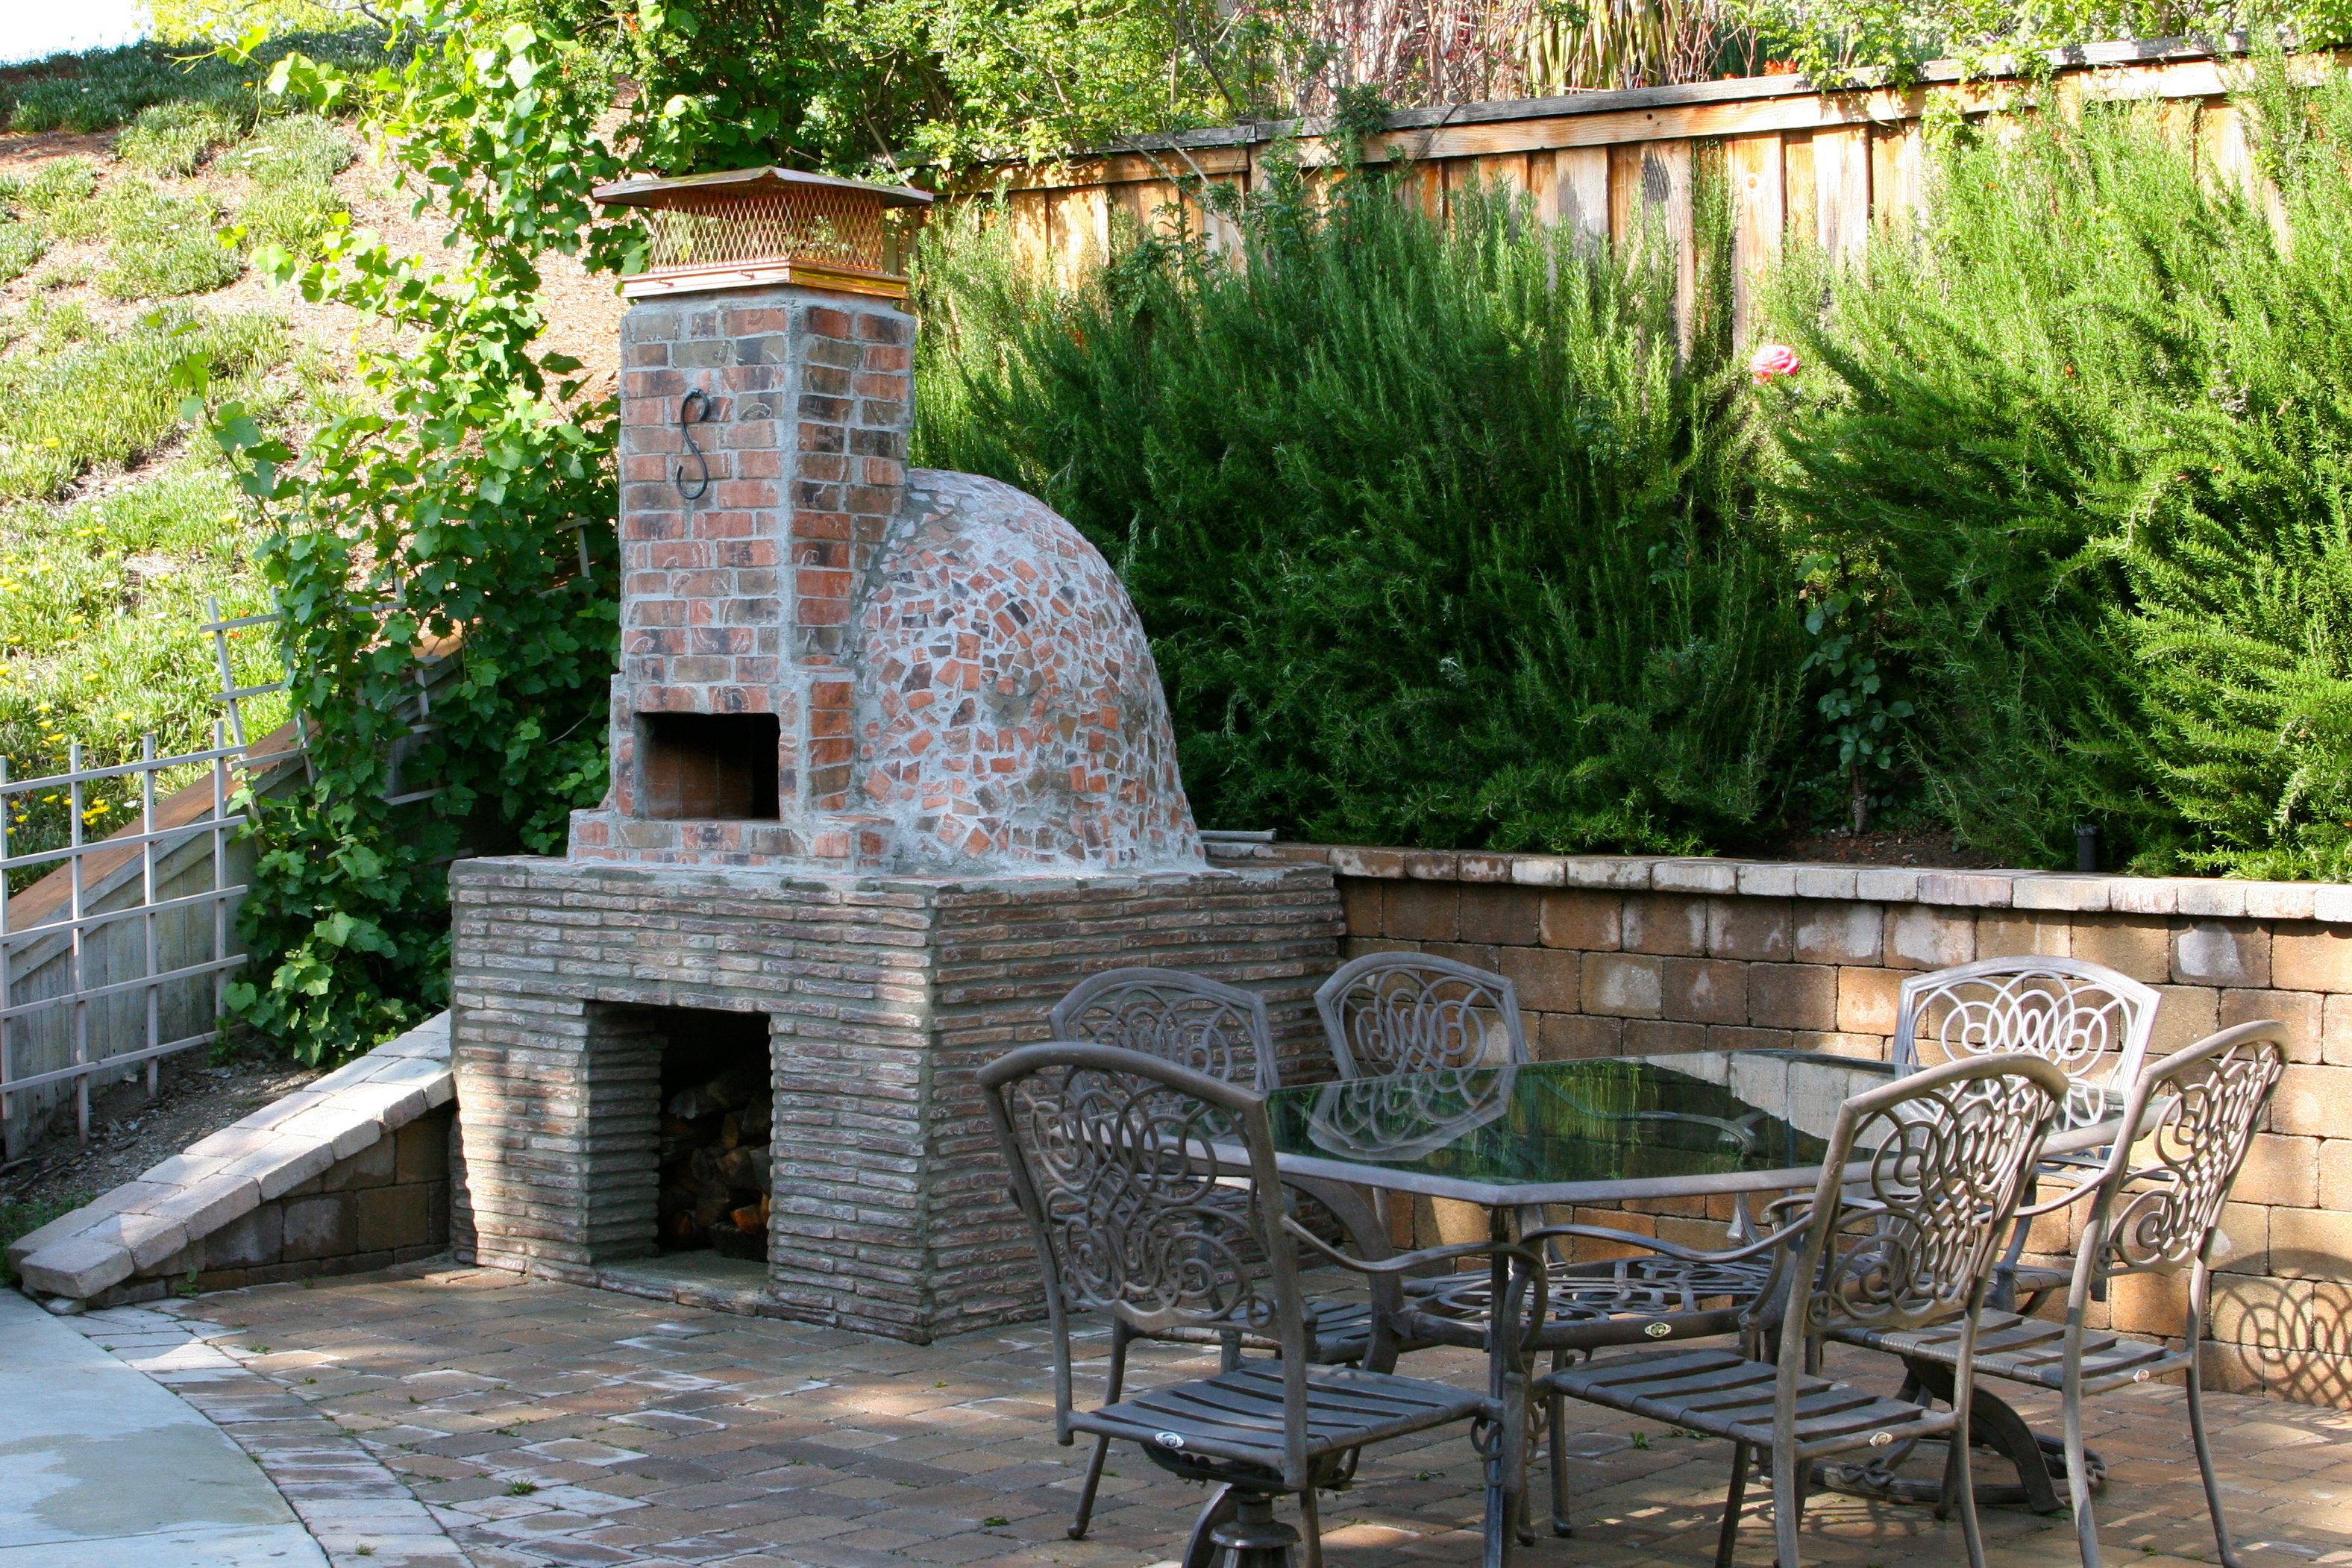  pizza so much we had to build a wood fired pizza oven in our back yard